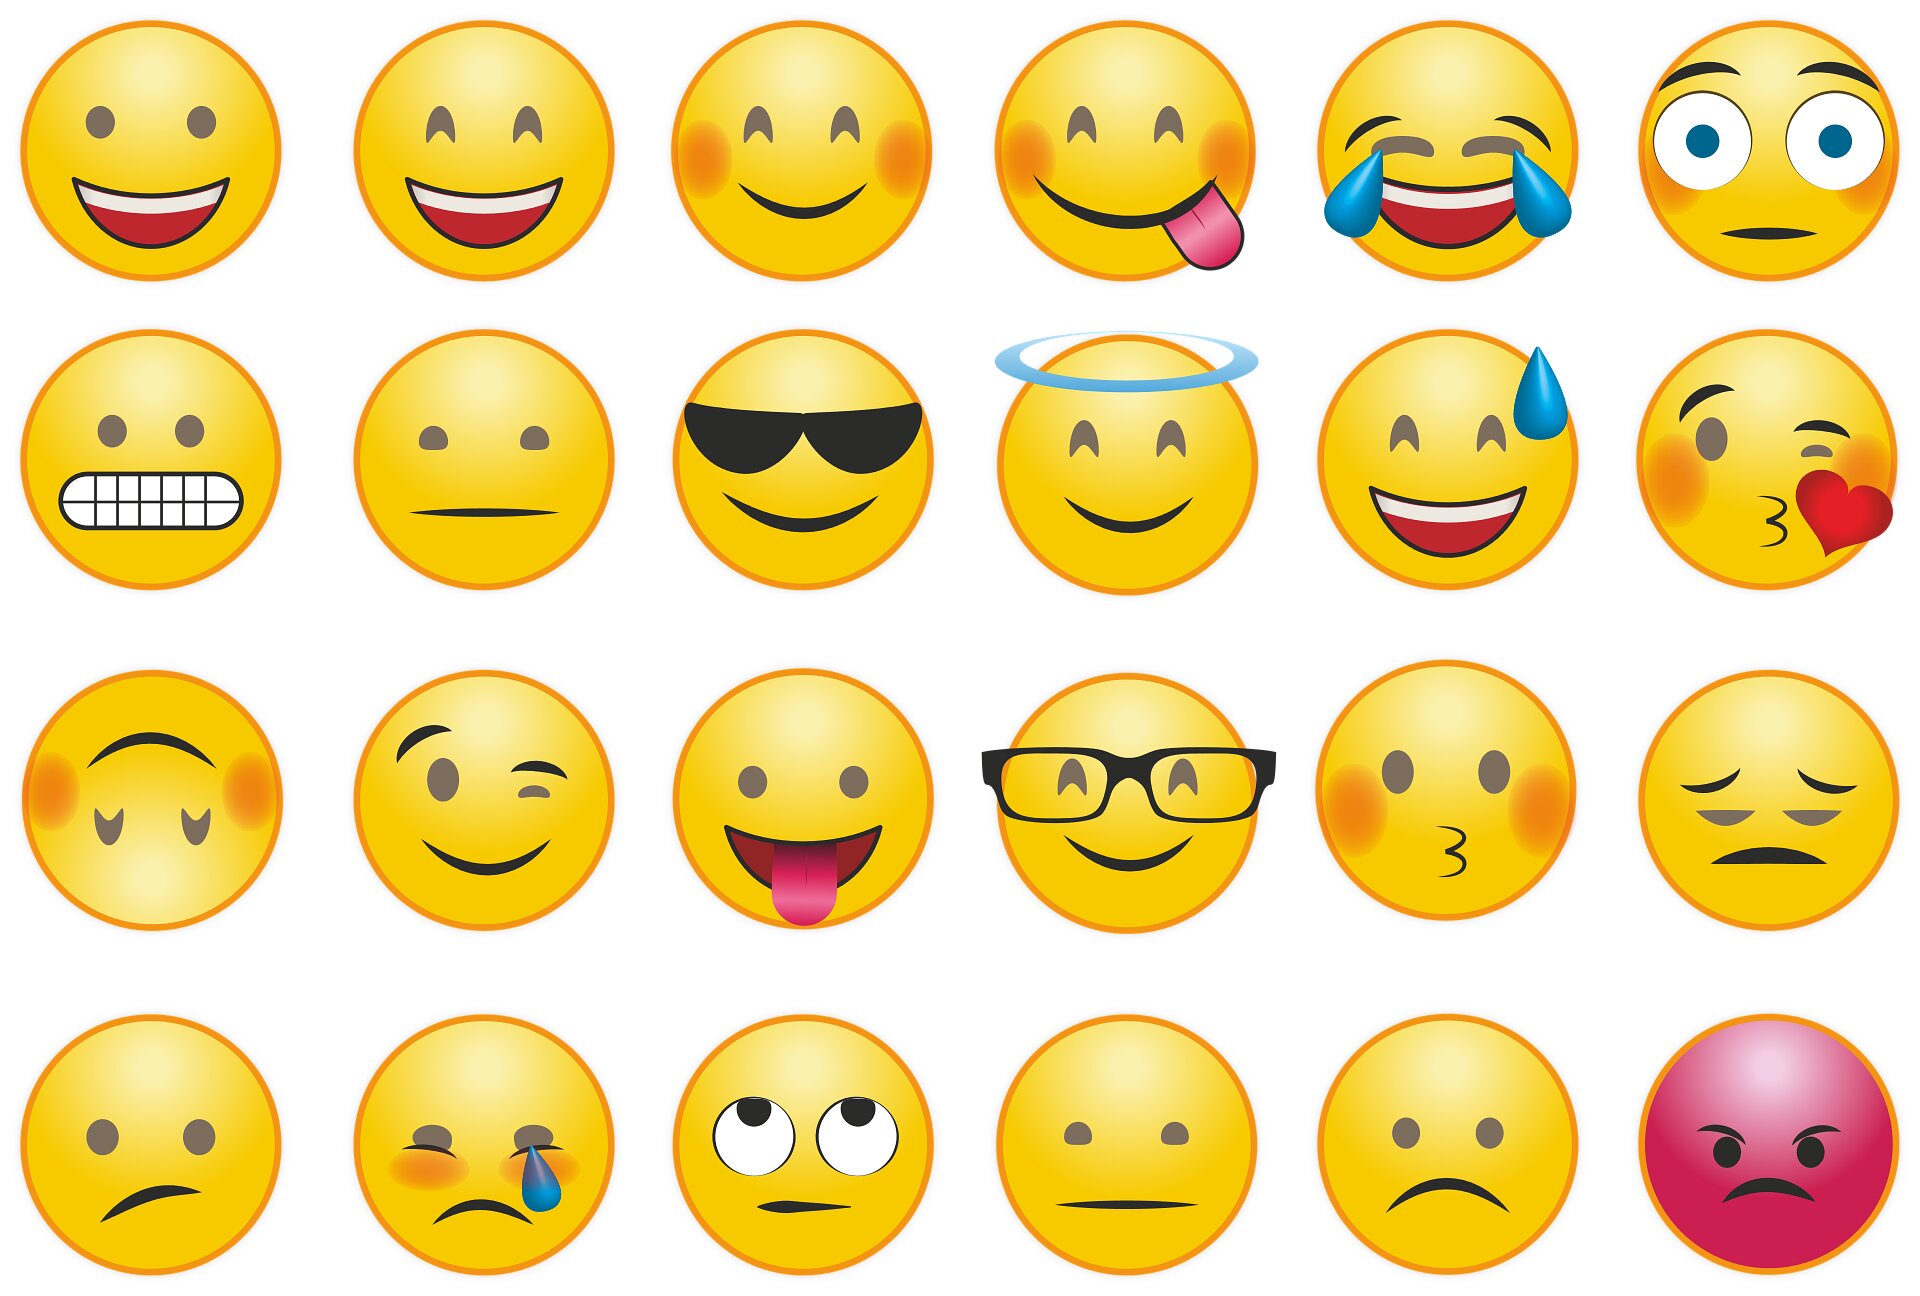 Emojis and Emotions in 2021